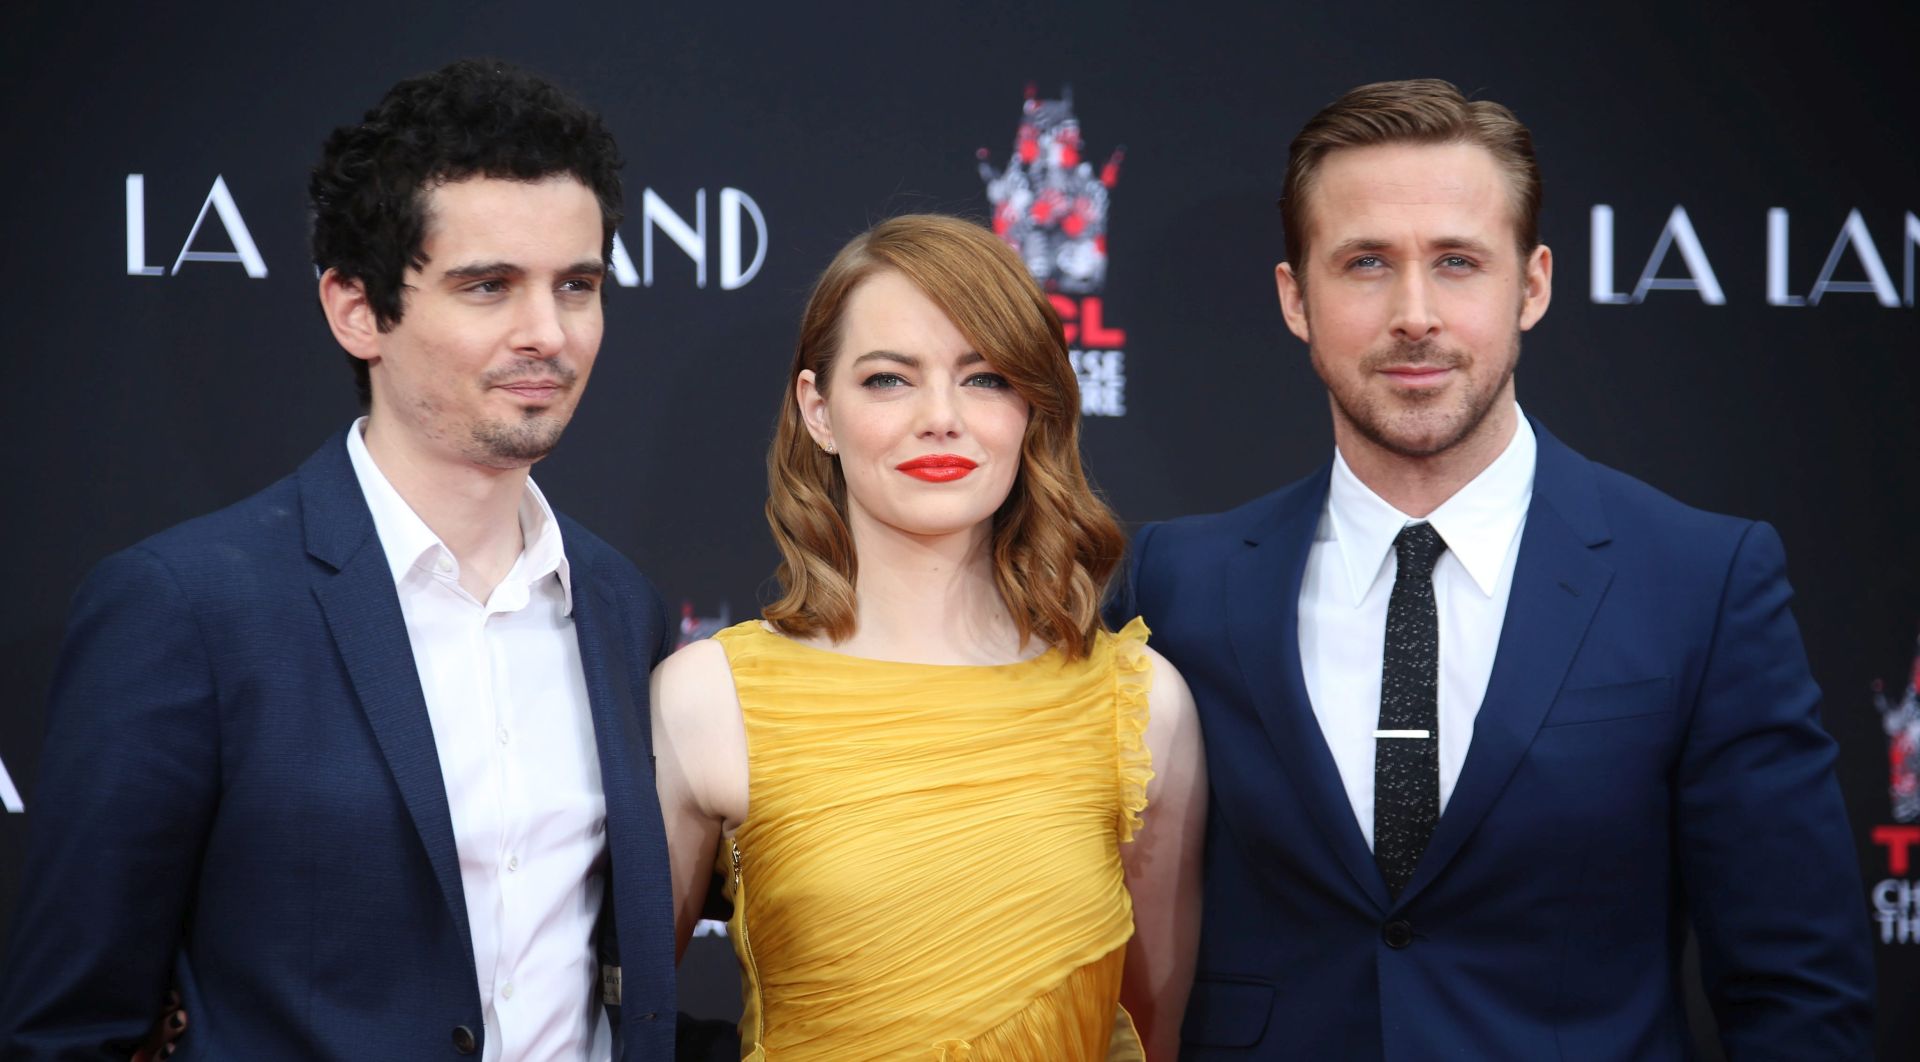 epa05746775 (FILE) A file picture dated 07 December 2016 shows US actress Emma Stone (C) and Canadian actor Ryan Gosling (R) as they pose with US director Damien Chazelle (L) during a hand and footprint ceremony honoring Stone and Gosling at the TCL Chinese Theatre in Hollywood, California, USA. The movie 'La La Land' by Damien Chazelle leads the Oscar nominations with 14 nods for, among others, Best Film, Best Director for Damien Chazelle, Best Actor for Ryan Gosling, Best Actress for Emma Stone.  EPA/MIKE NELSON